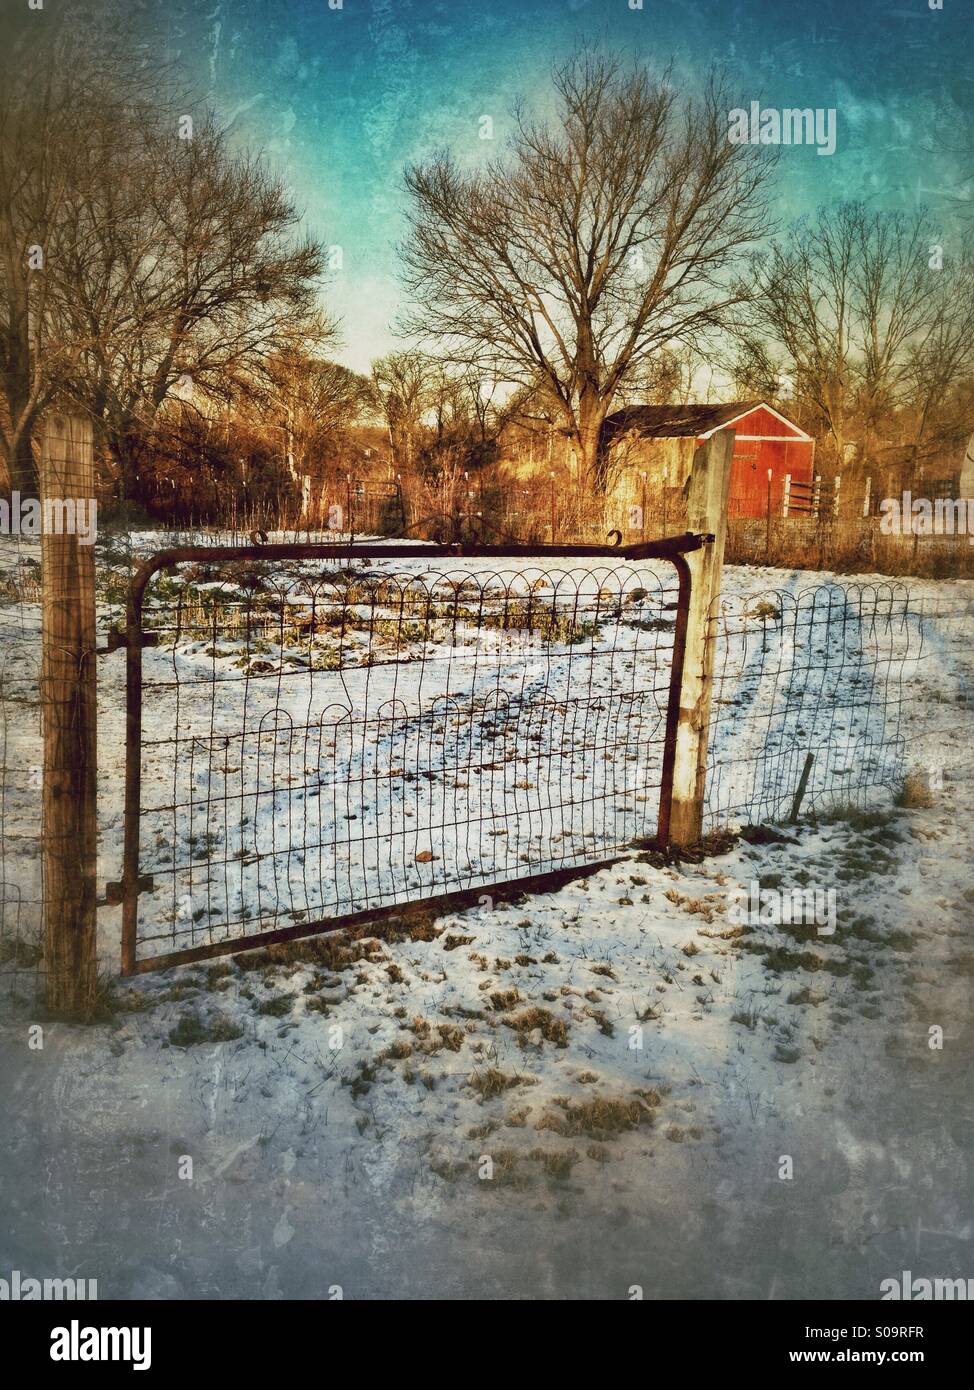 A rusty gate in the snow with a red barn in the background. Stock Photo